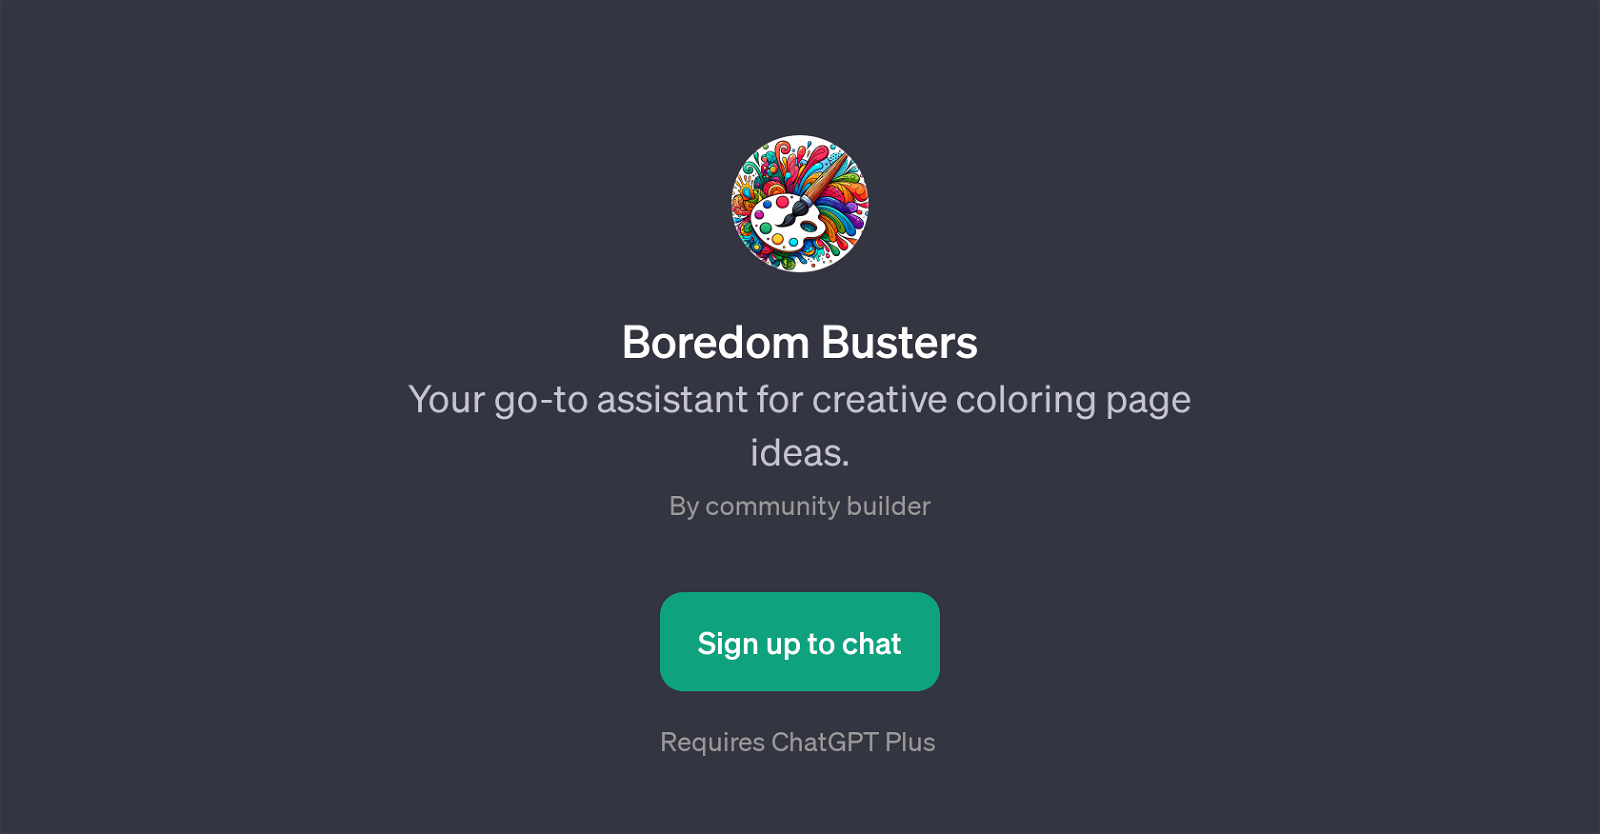 Boredom Busters website